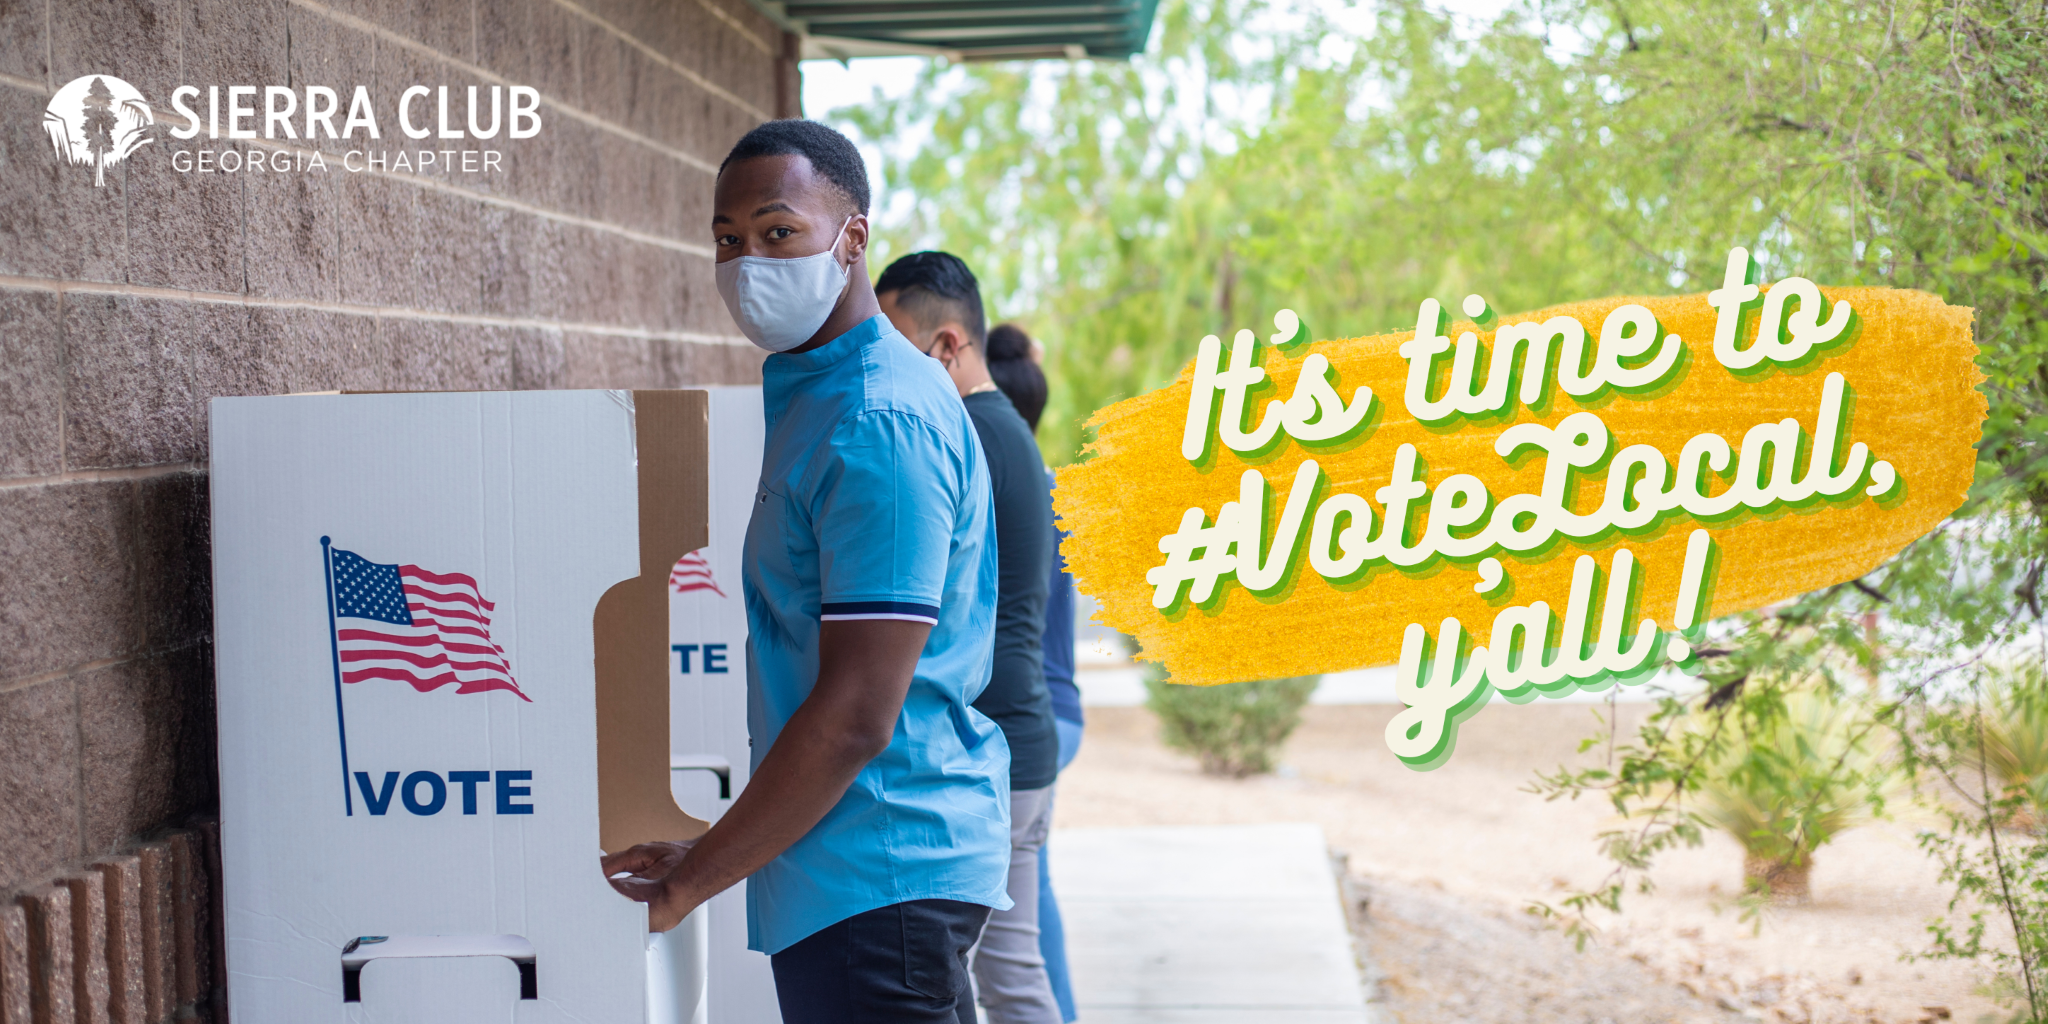 It's time to #VoteLocal, y'all!